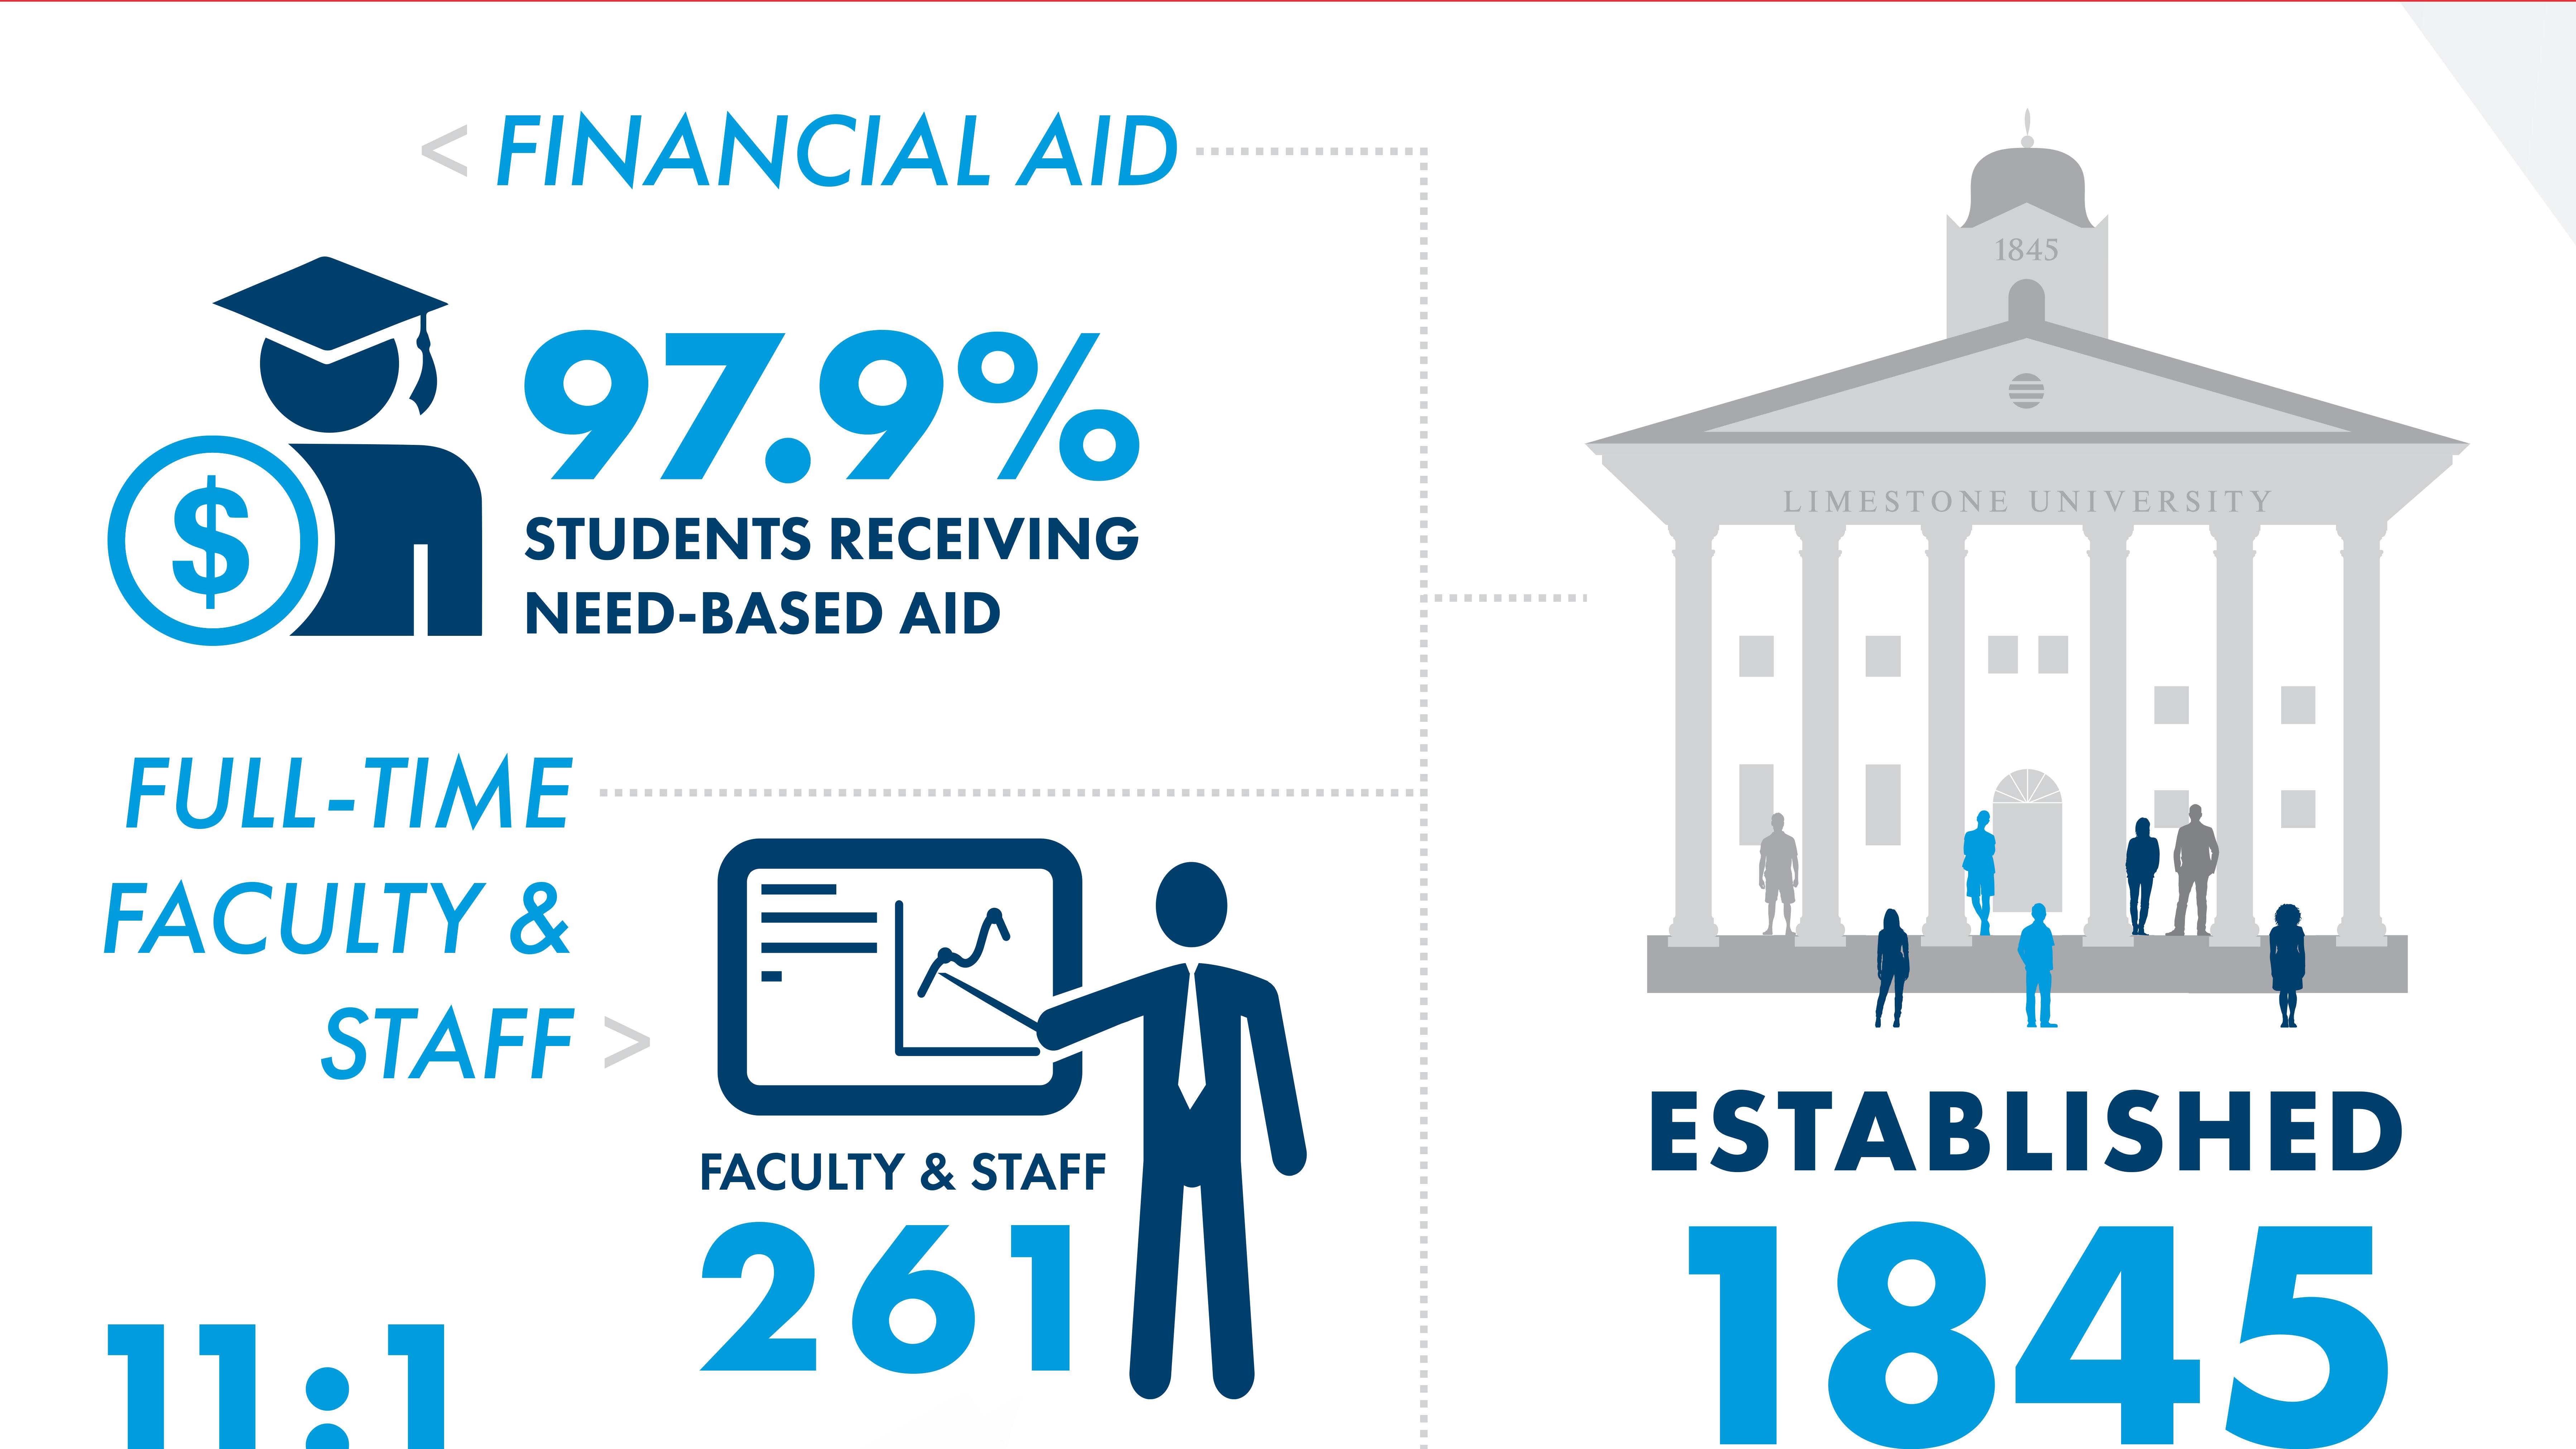 850 students live on-campus, 10 Men's Sports, 13 Women's Sports, 11:1 Student to Faculty Ratio, 97.9% of students receive need-based aid